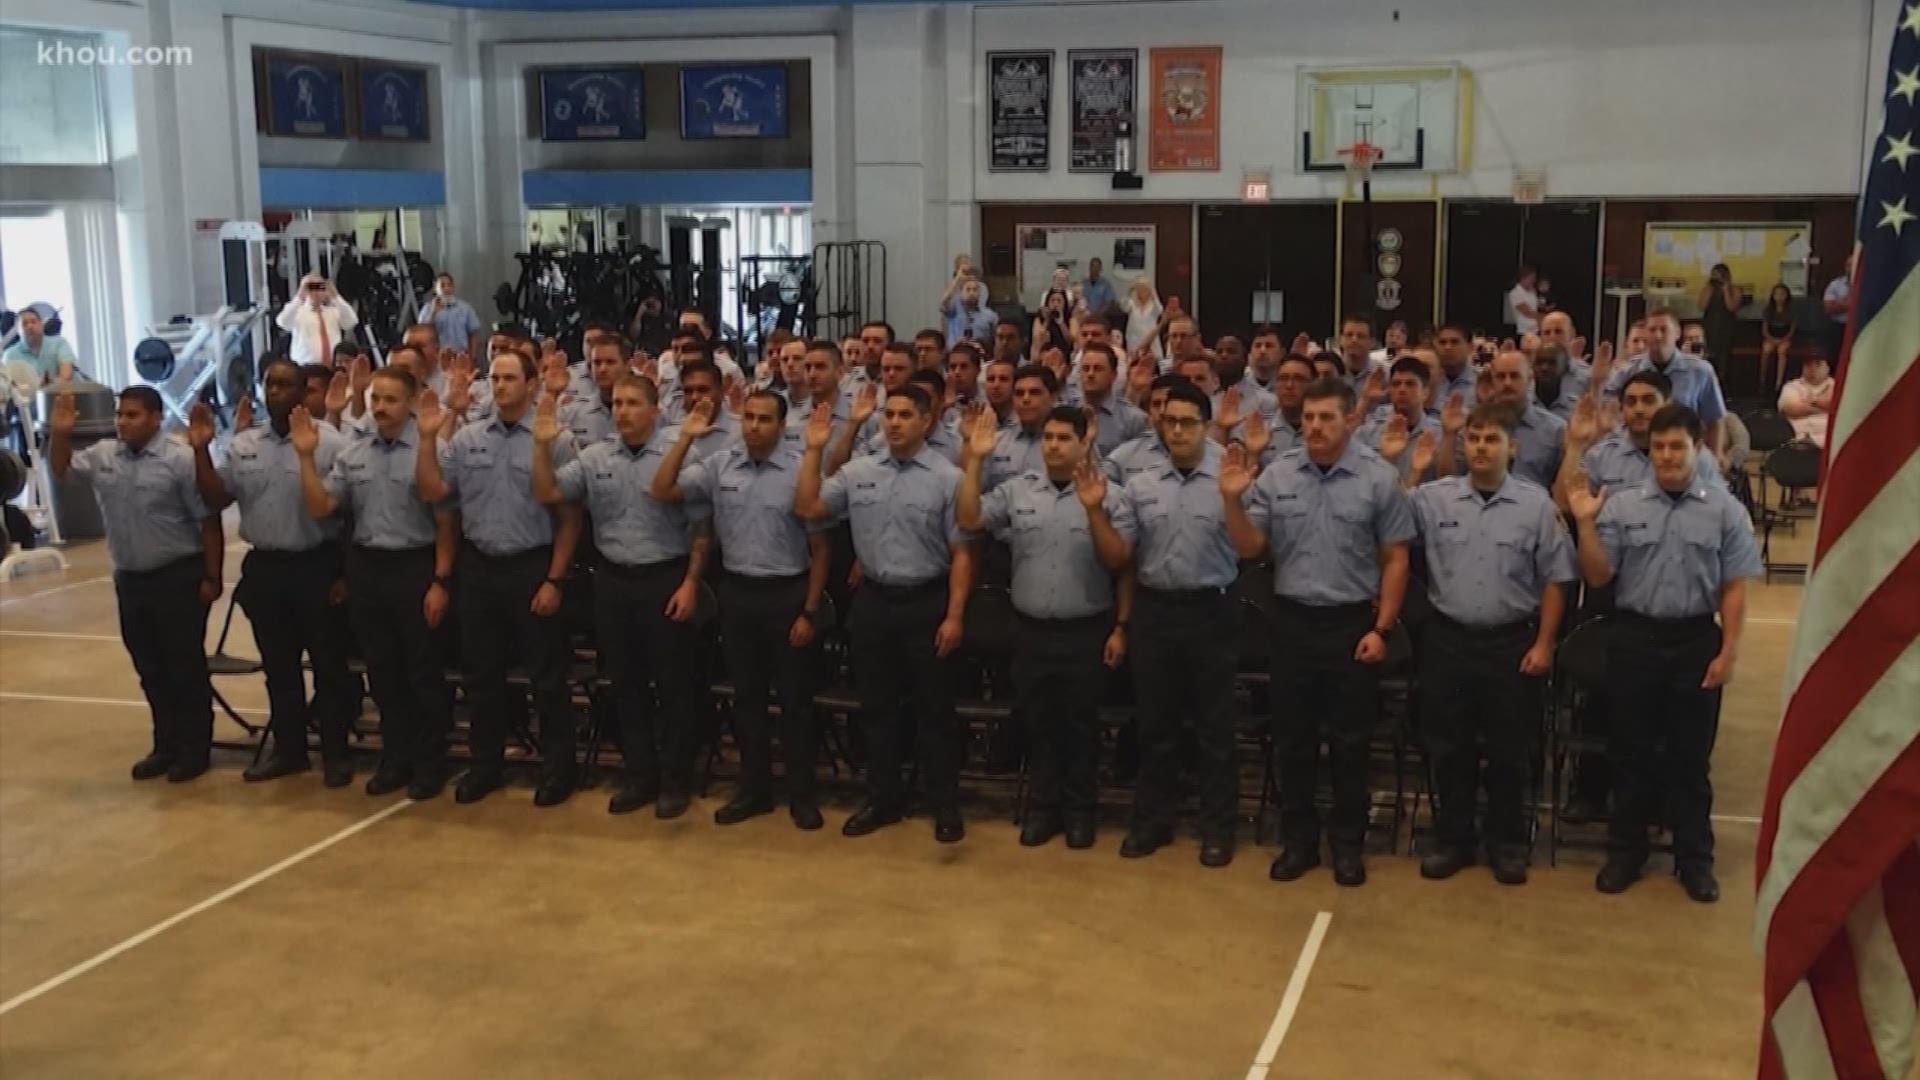 Sixty-six Houston fire cadets are now officially firefighters. They could start as early as Saturday.